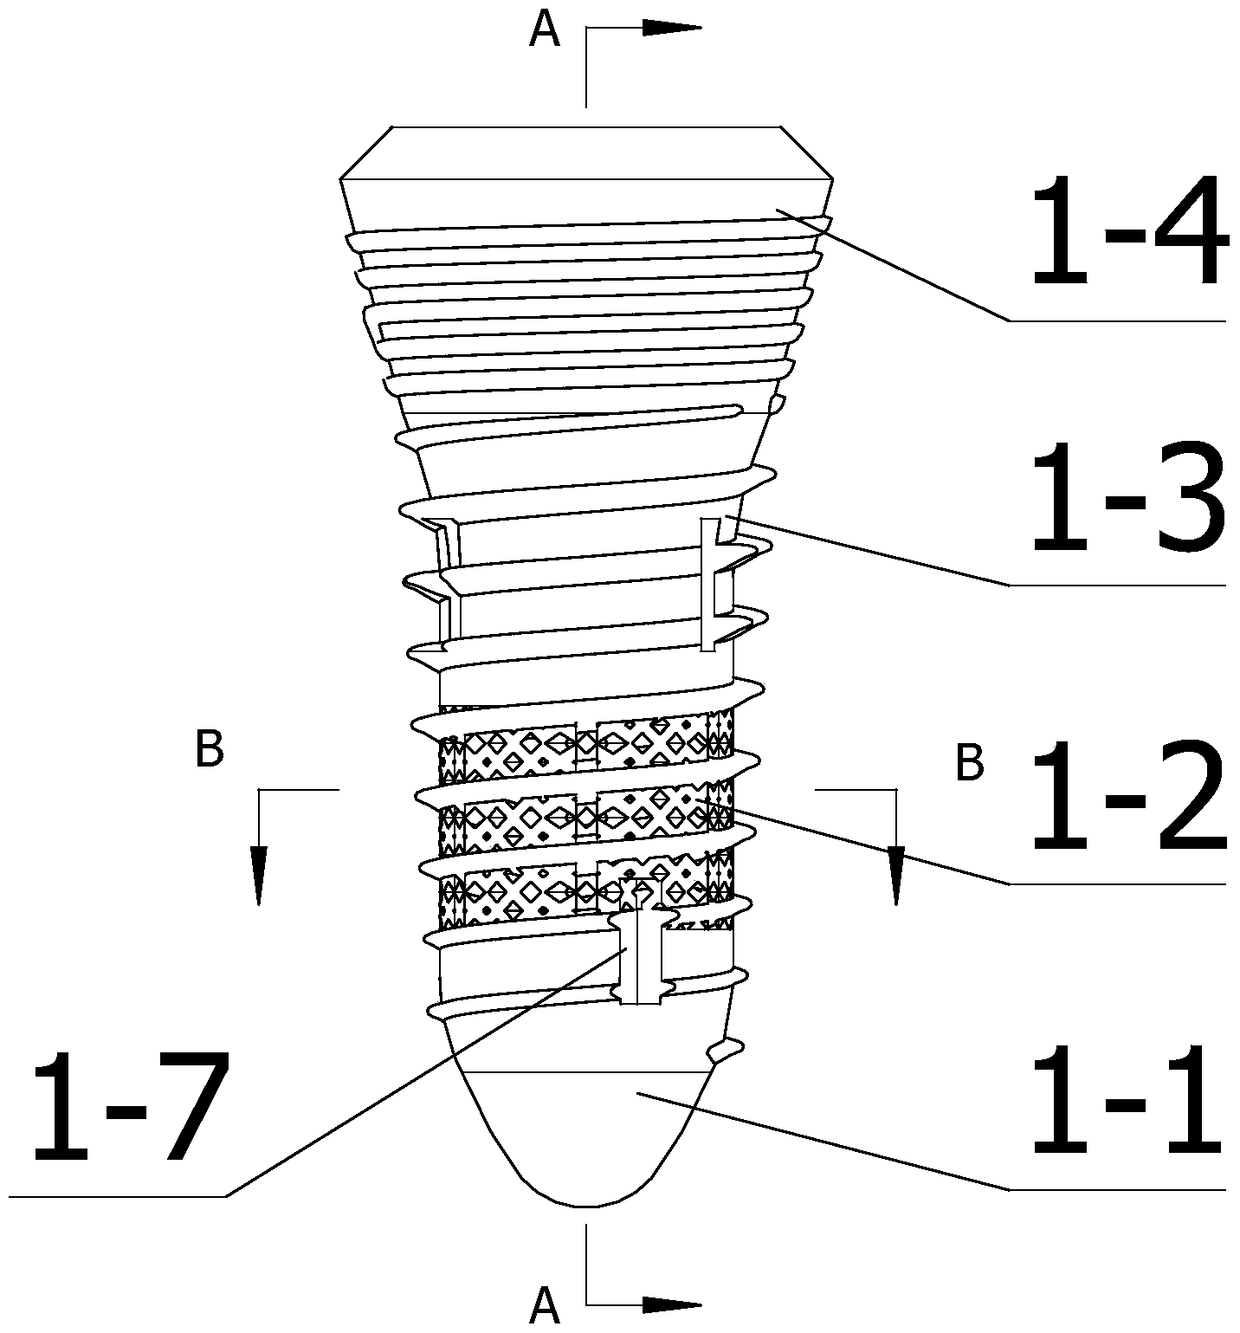 Multi-segment implant components and methods of making the same